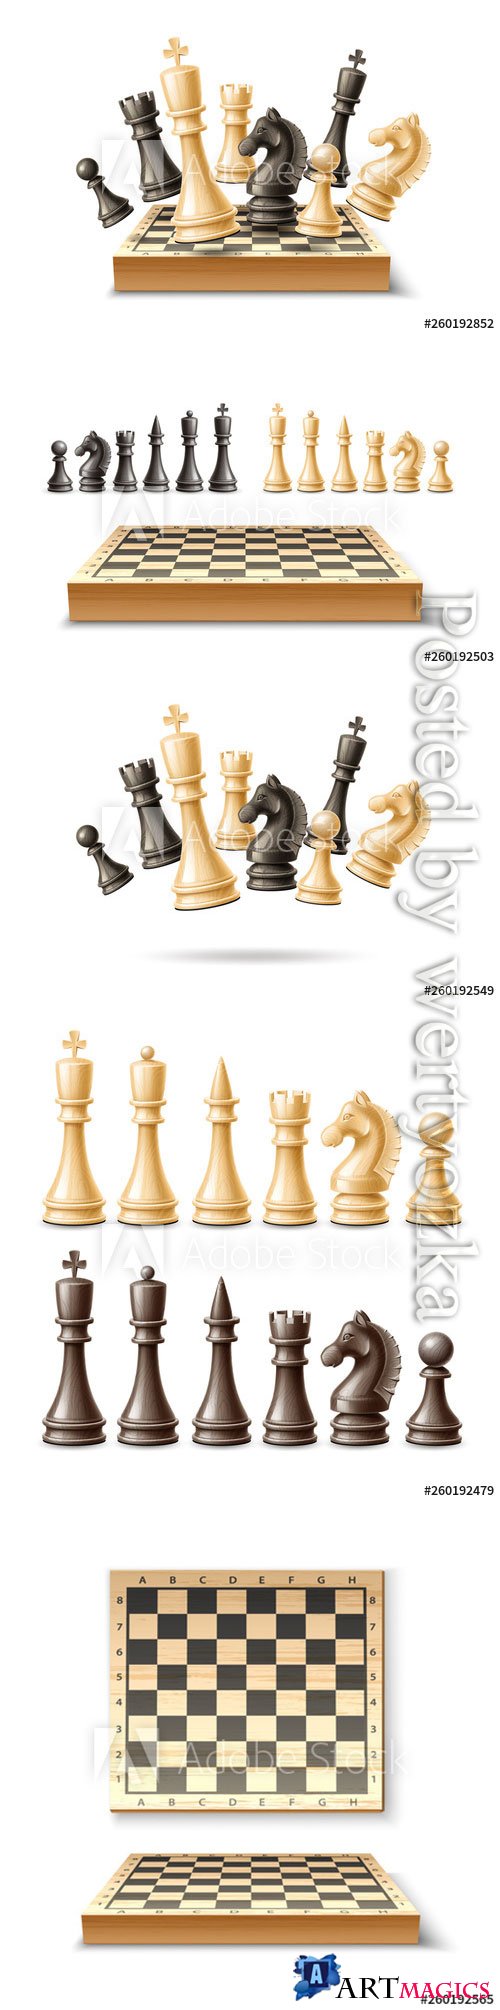 Realistic chess pieces and chessboard set vector illustrations